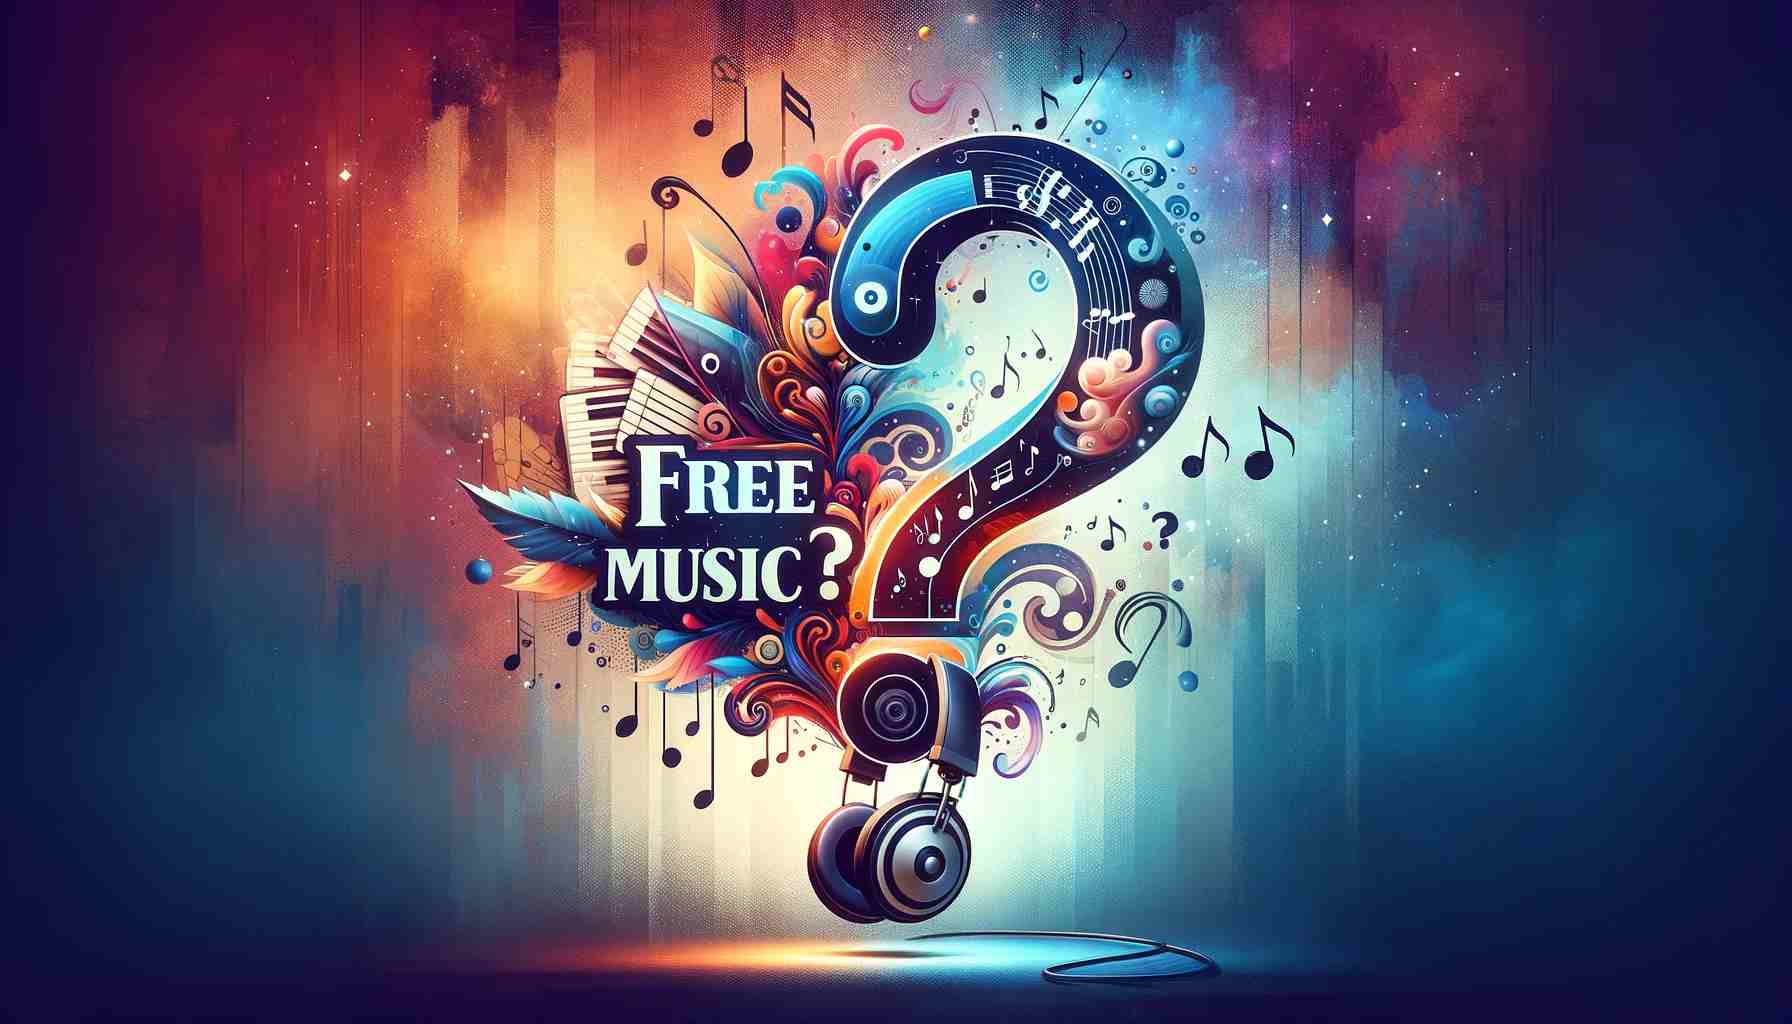 Free music - what is it?